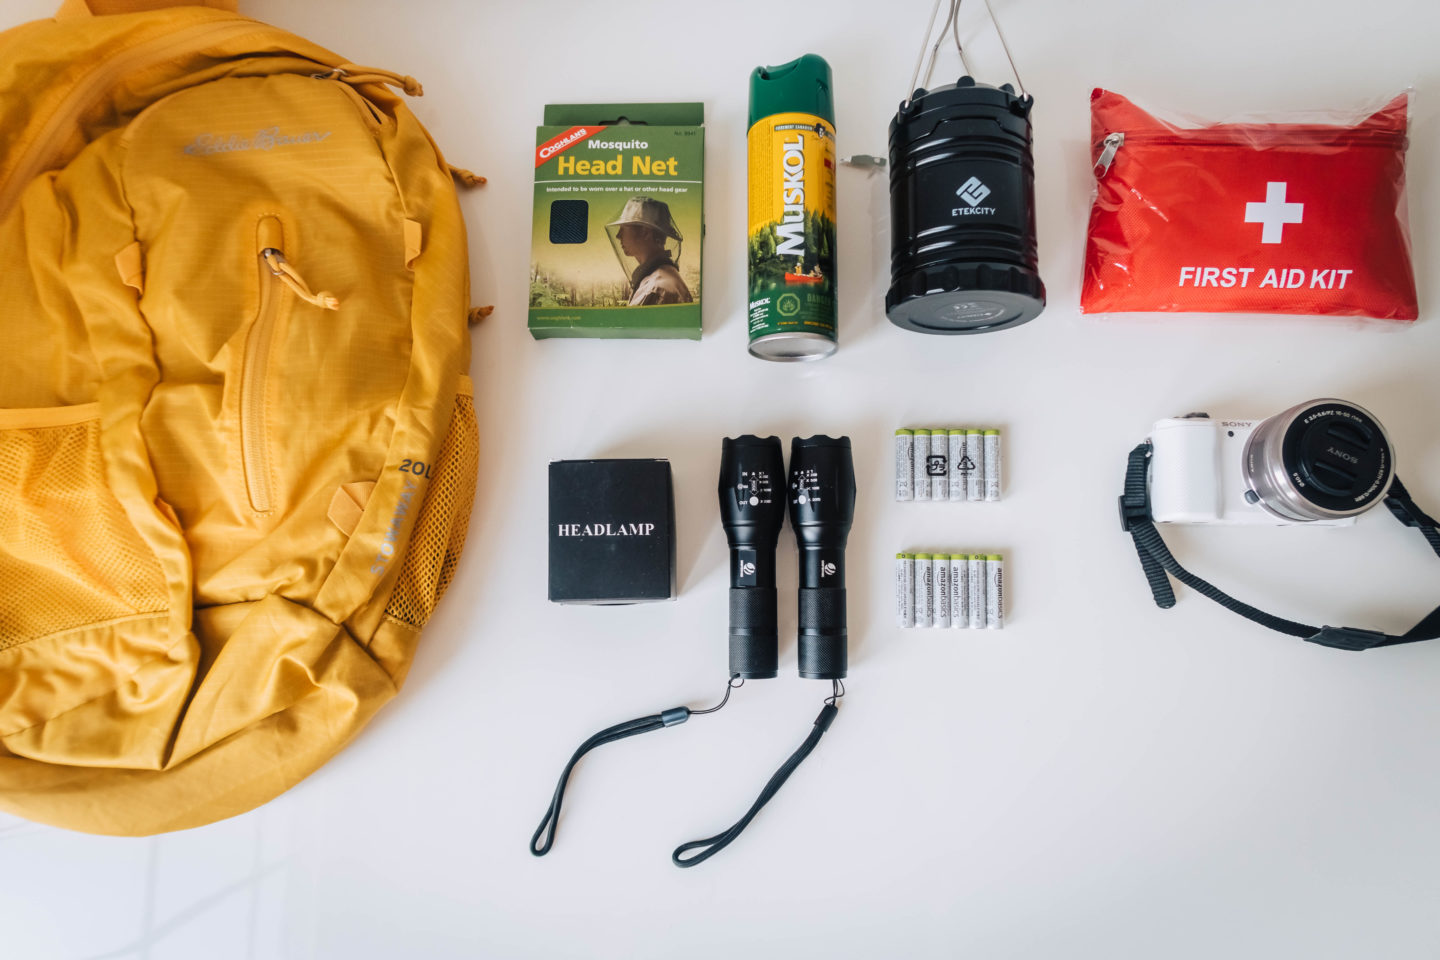 25 Hiking Gadgets and Gear Items Under 25 Dollars